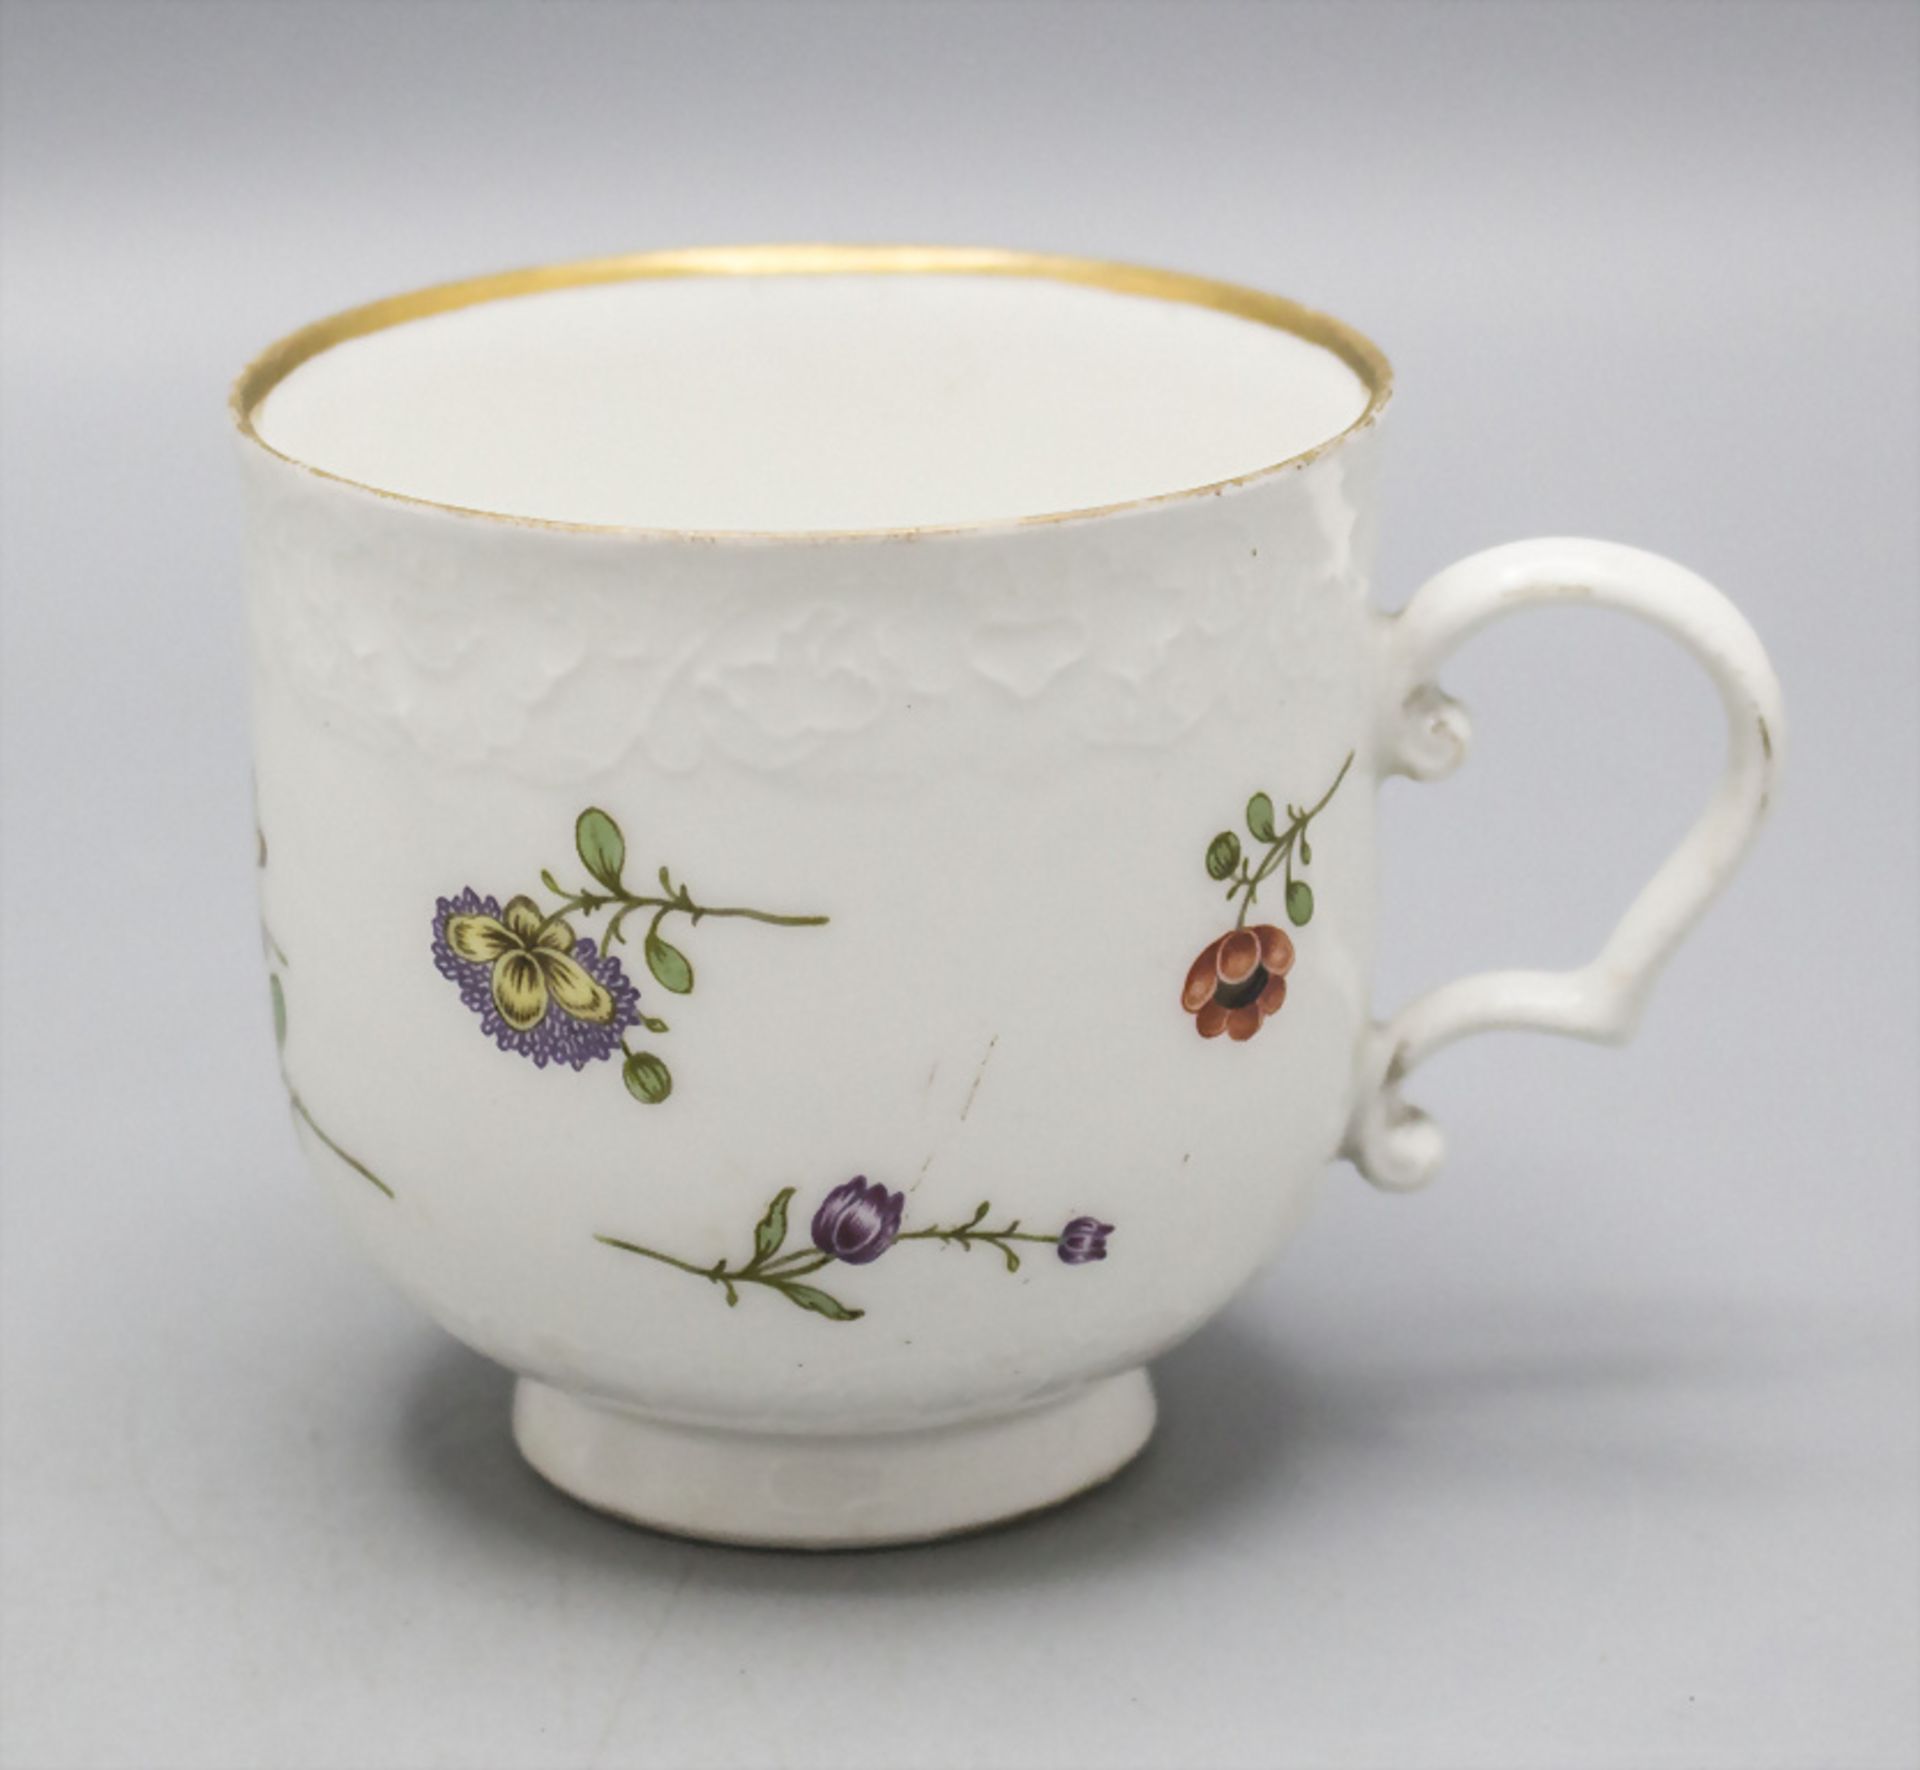 Tasse und Untertasse mit seltener Blumenmalerei / A cup and saucer with rare flower paintings, ... - Image 2 of 6